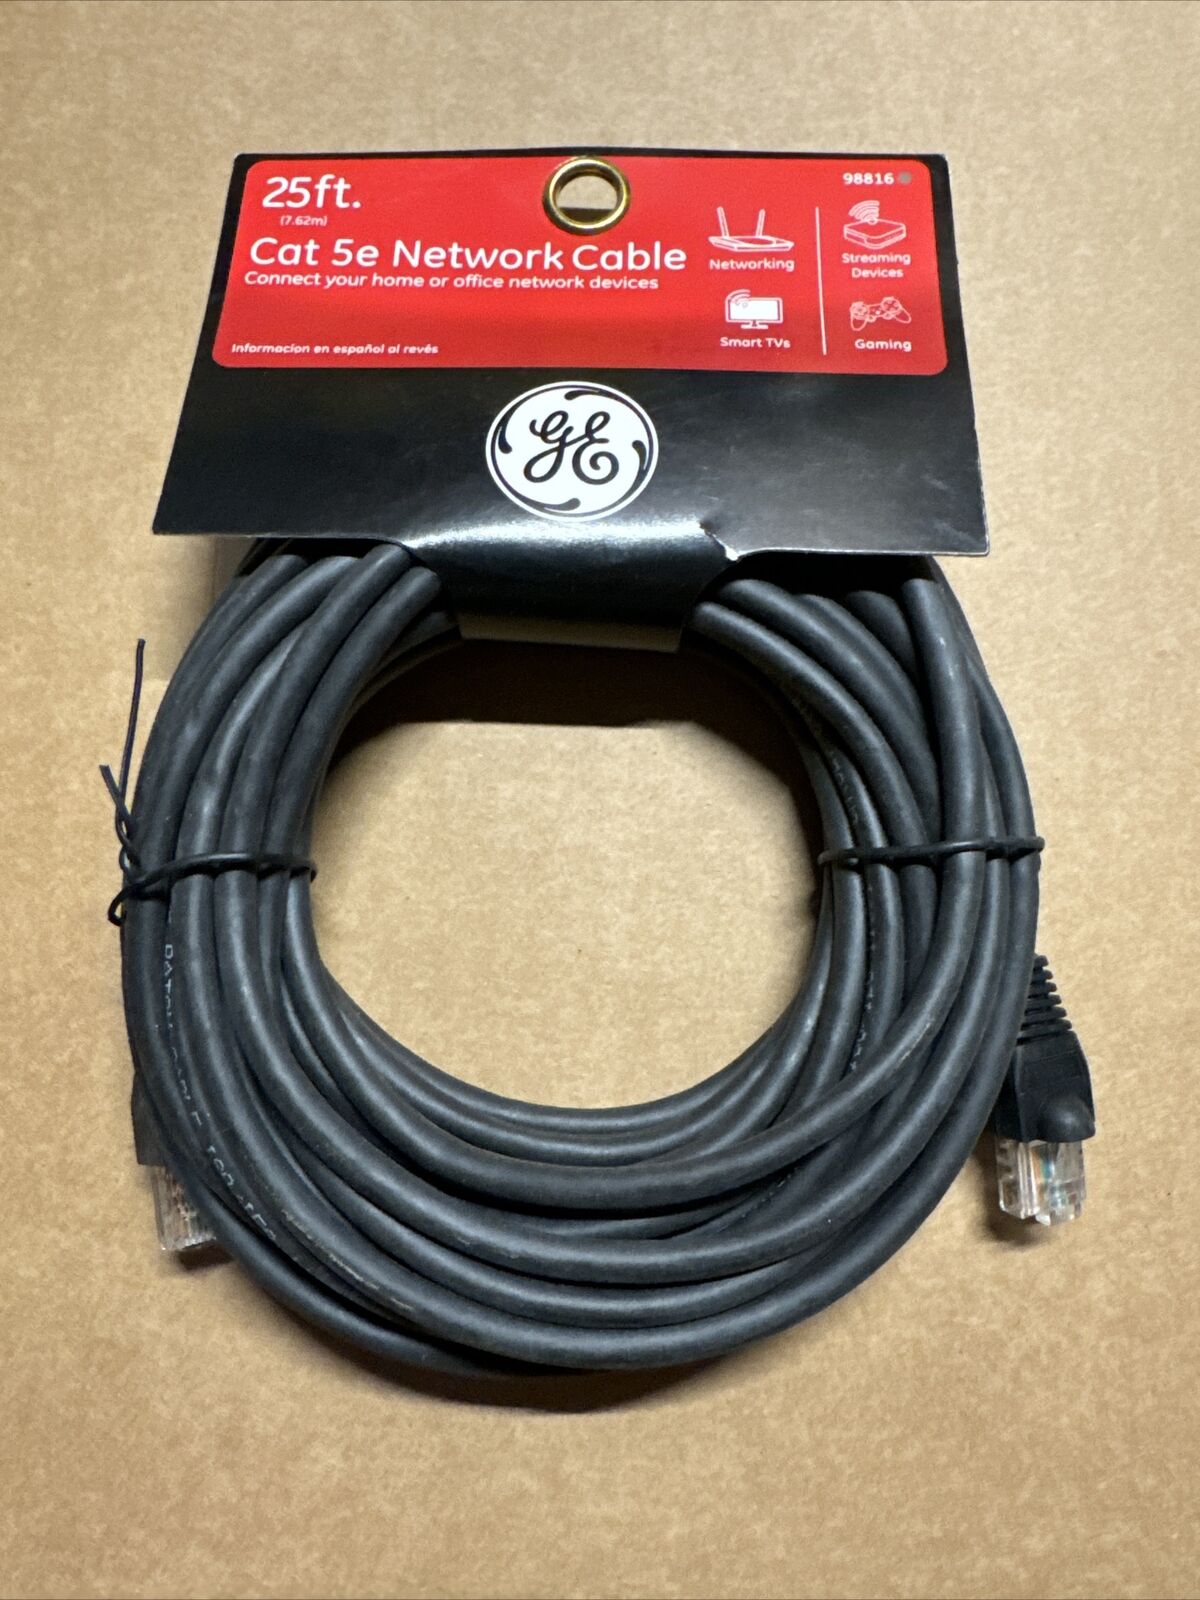 GENERAL ELECTRIC GE 98816 Cat-5E Network Ethernet Cable (25 Feet) New With Tags